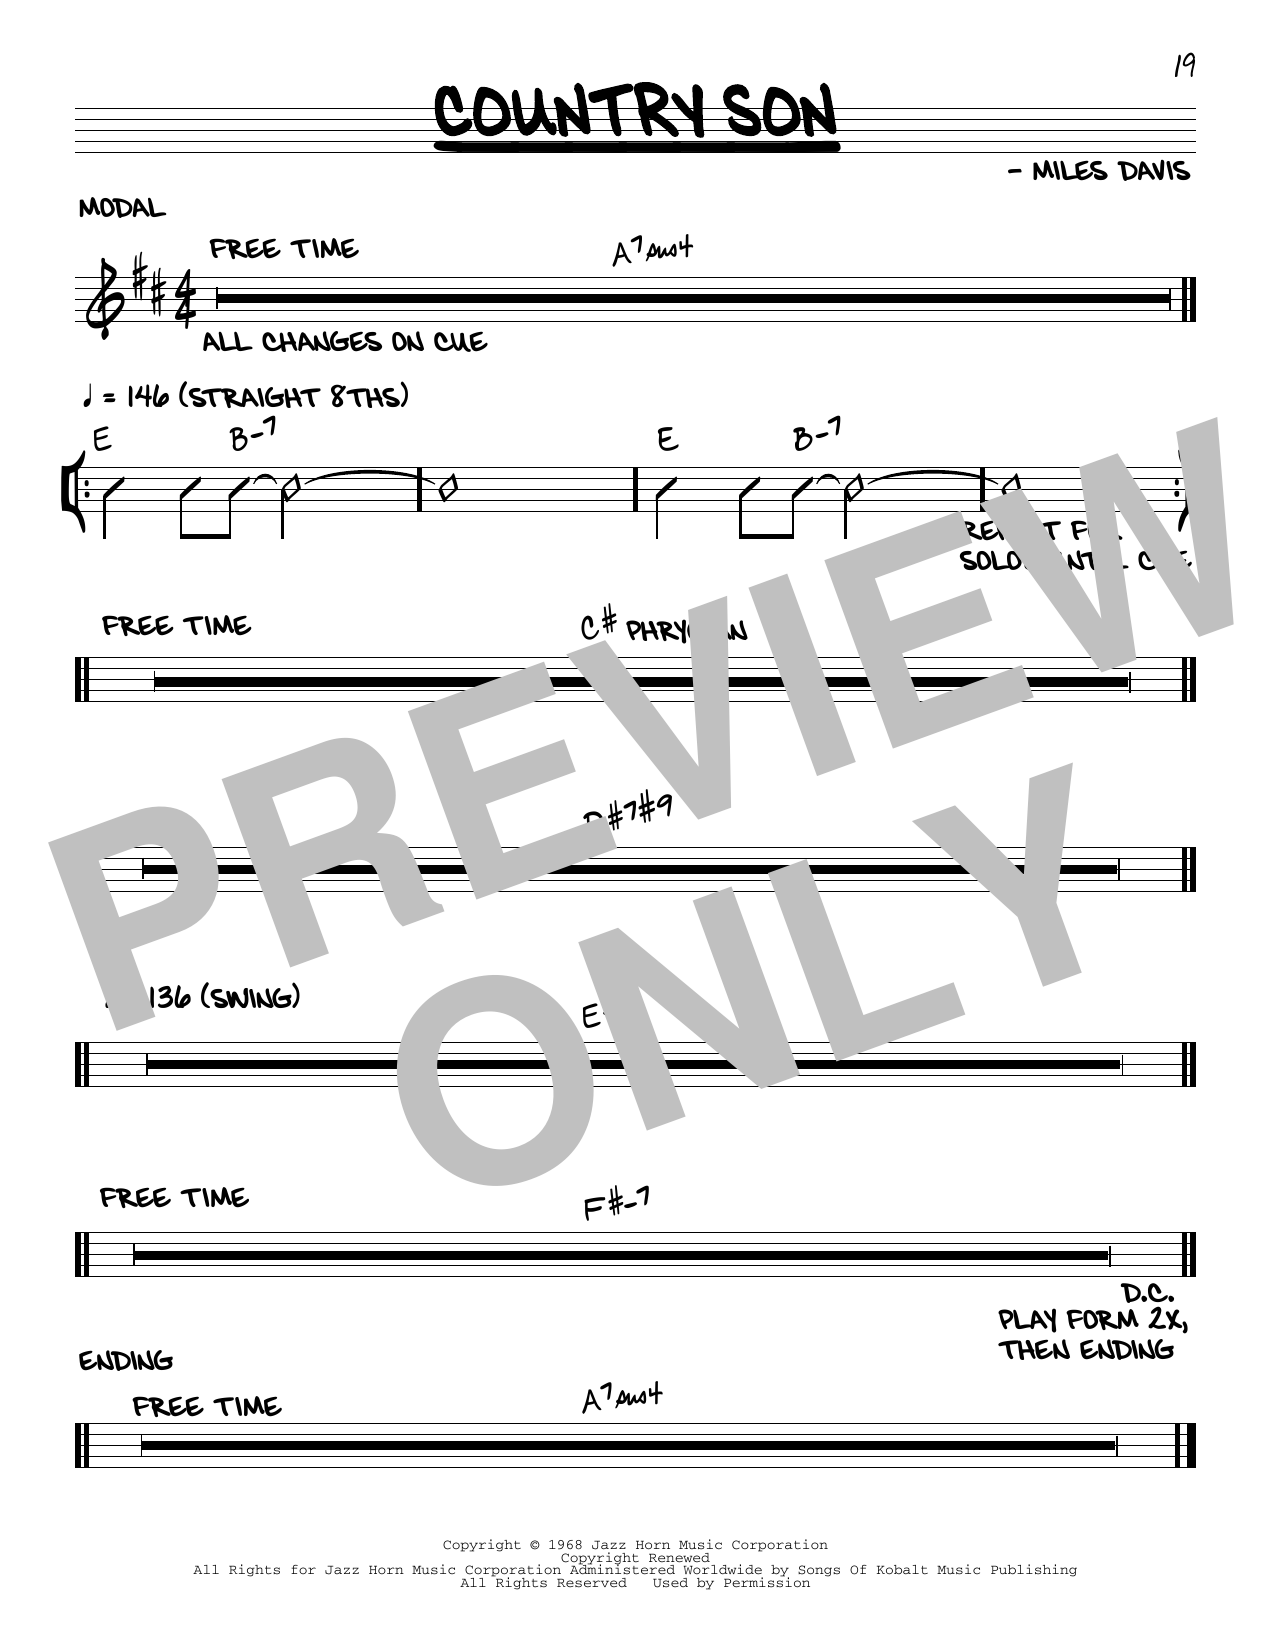 Download Miles Davis Country Son Sheet Music